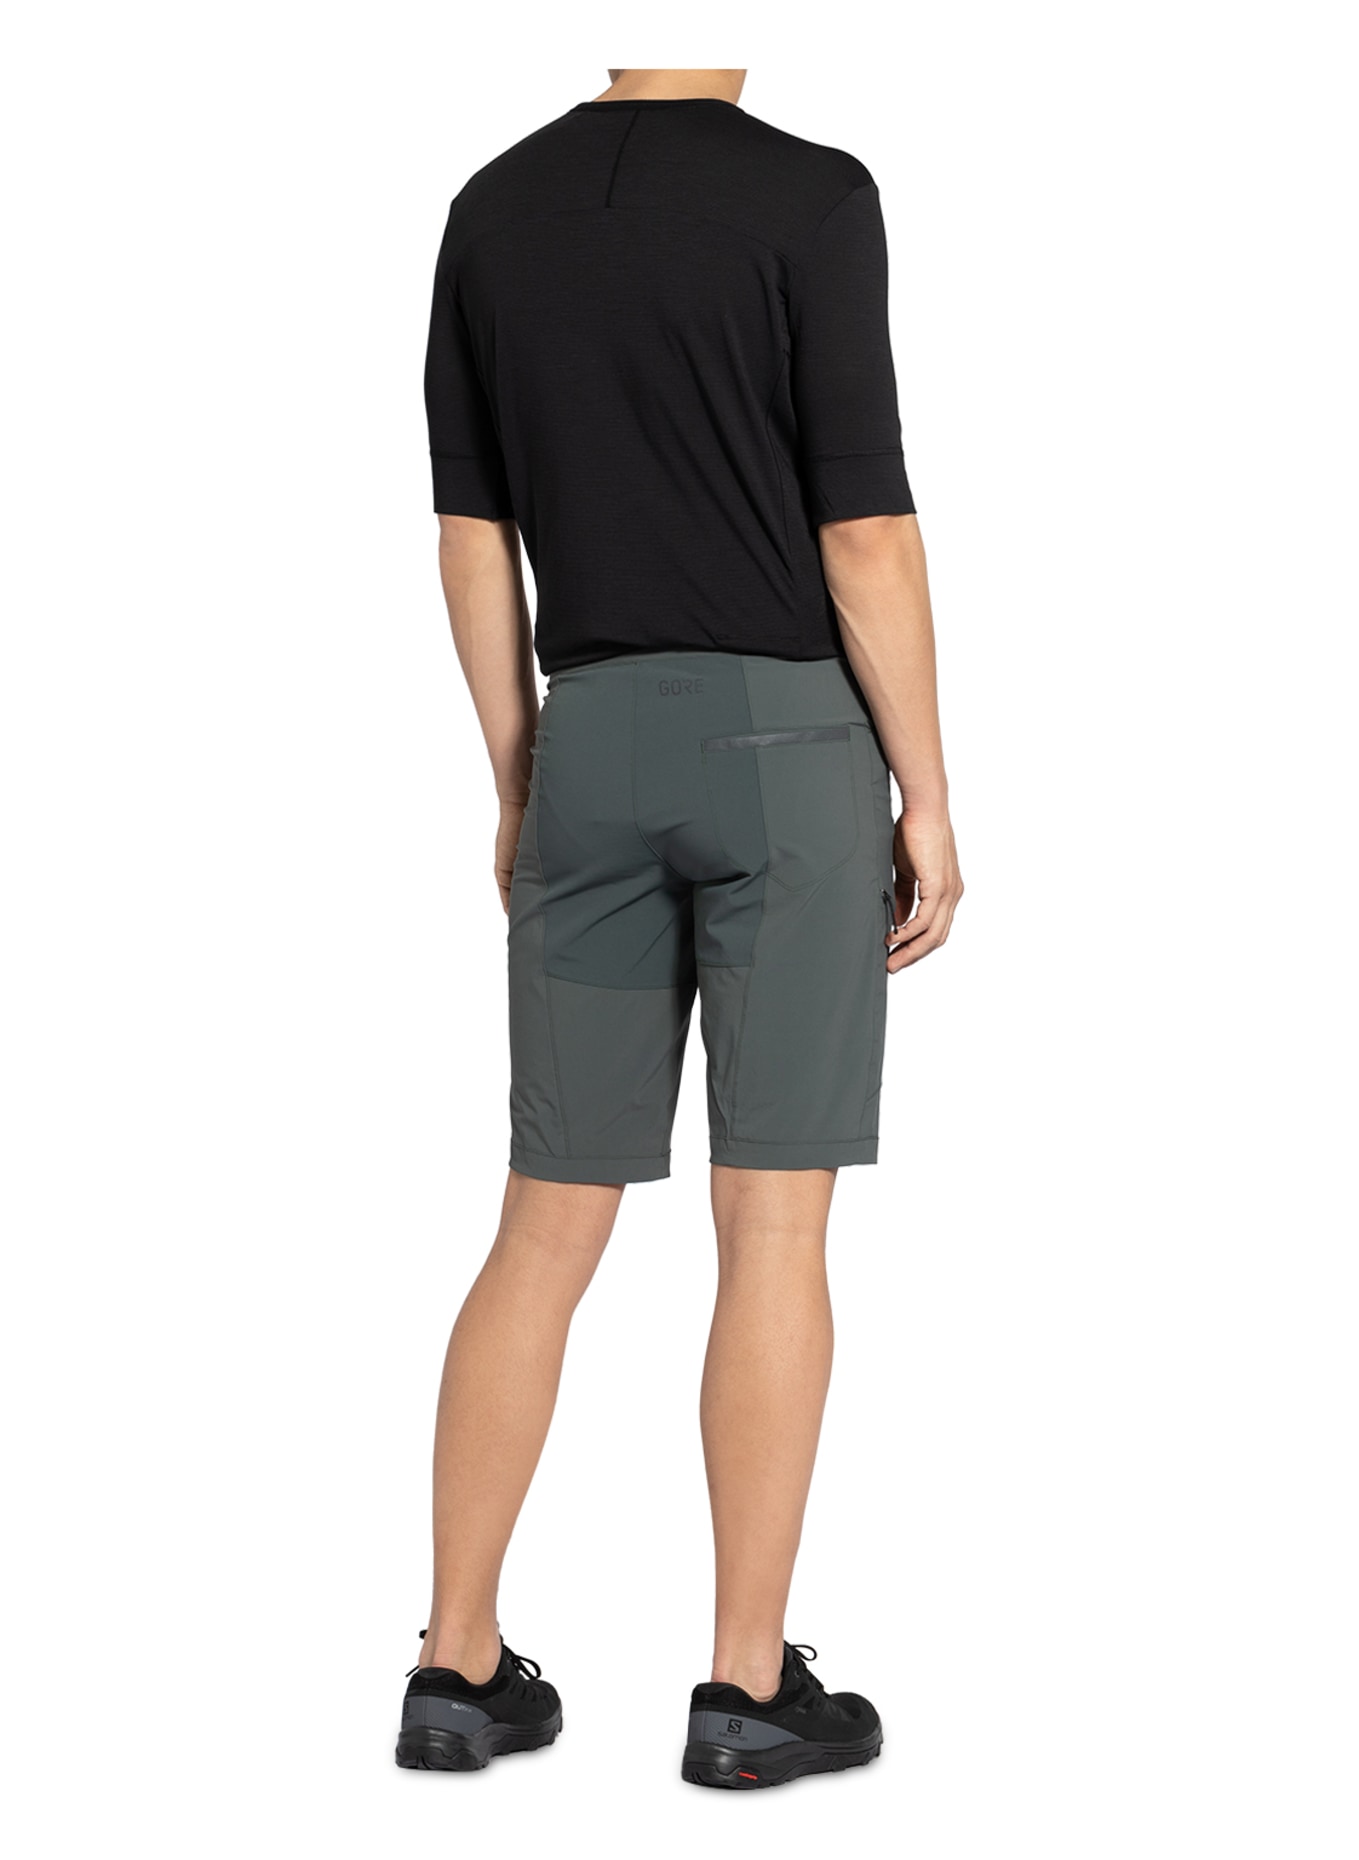 GORE BIKE WEAR Cycling shorts EXPLORE without padded insert, Color: TEAL (Image 3)